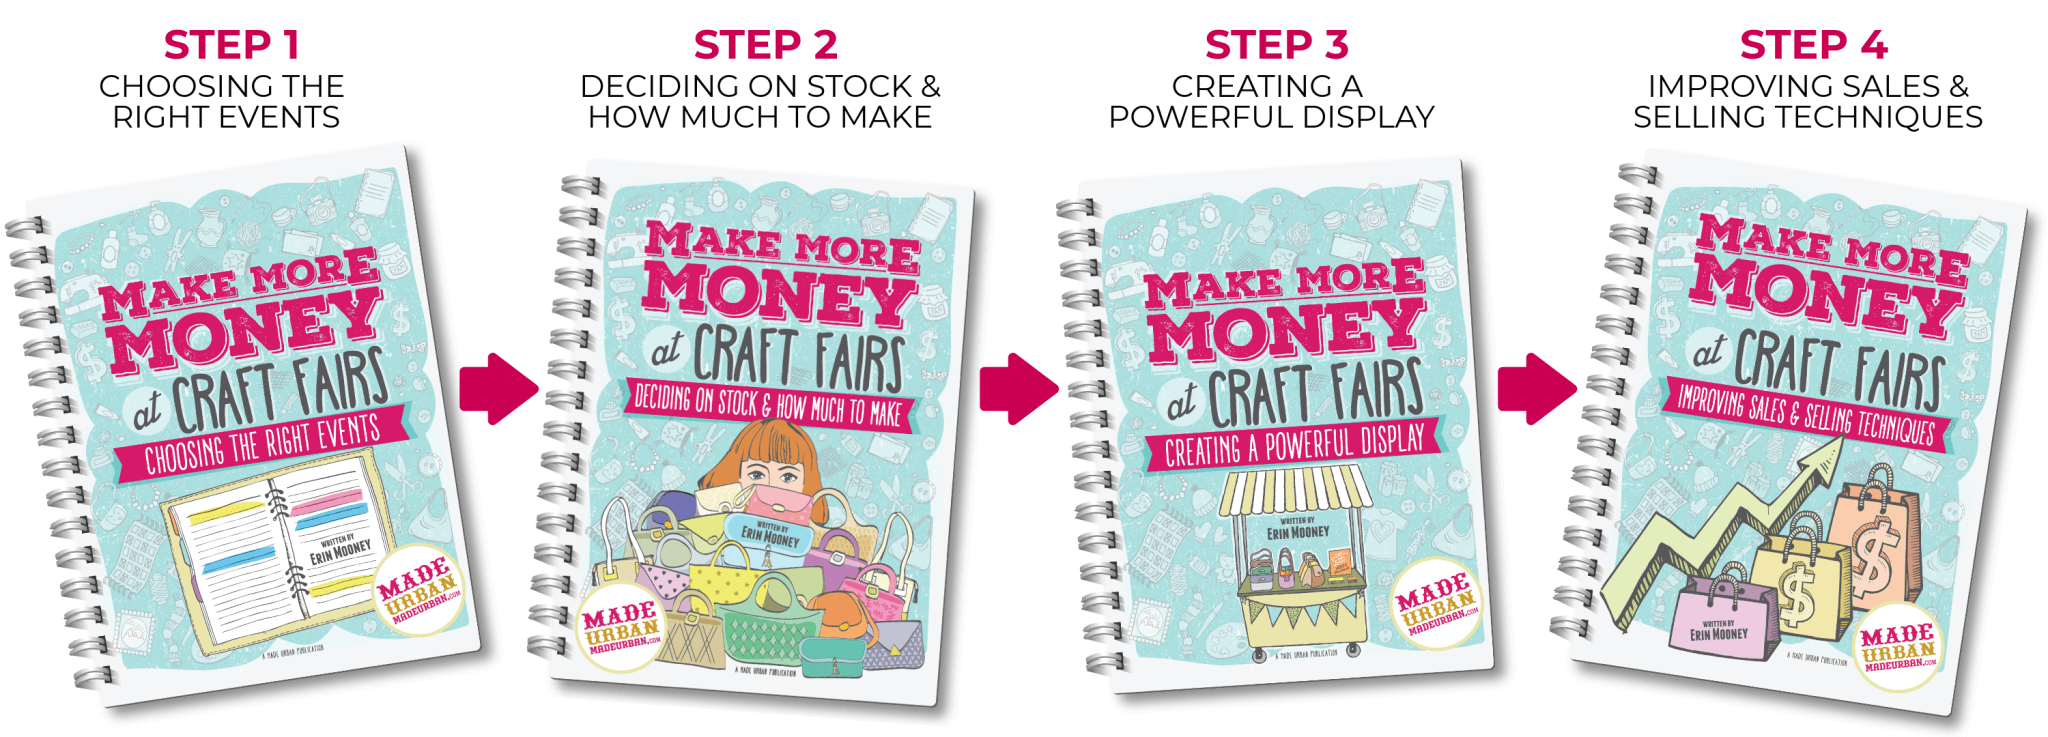 Make More Money at Craft Fairs - all ebooks